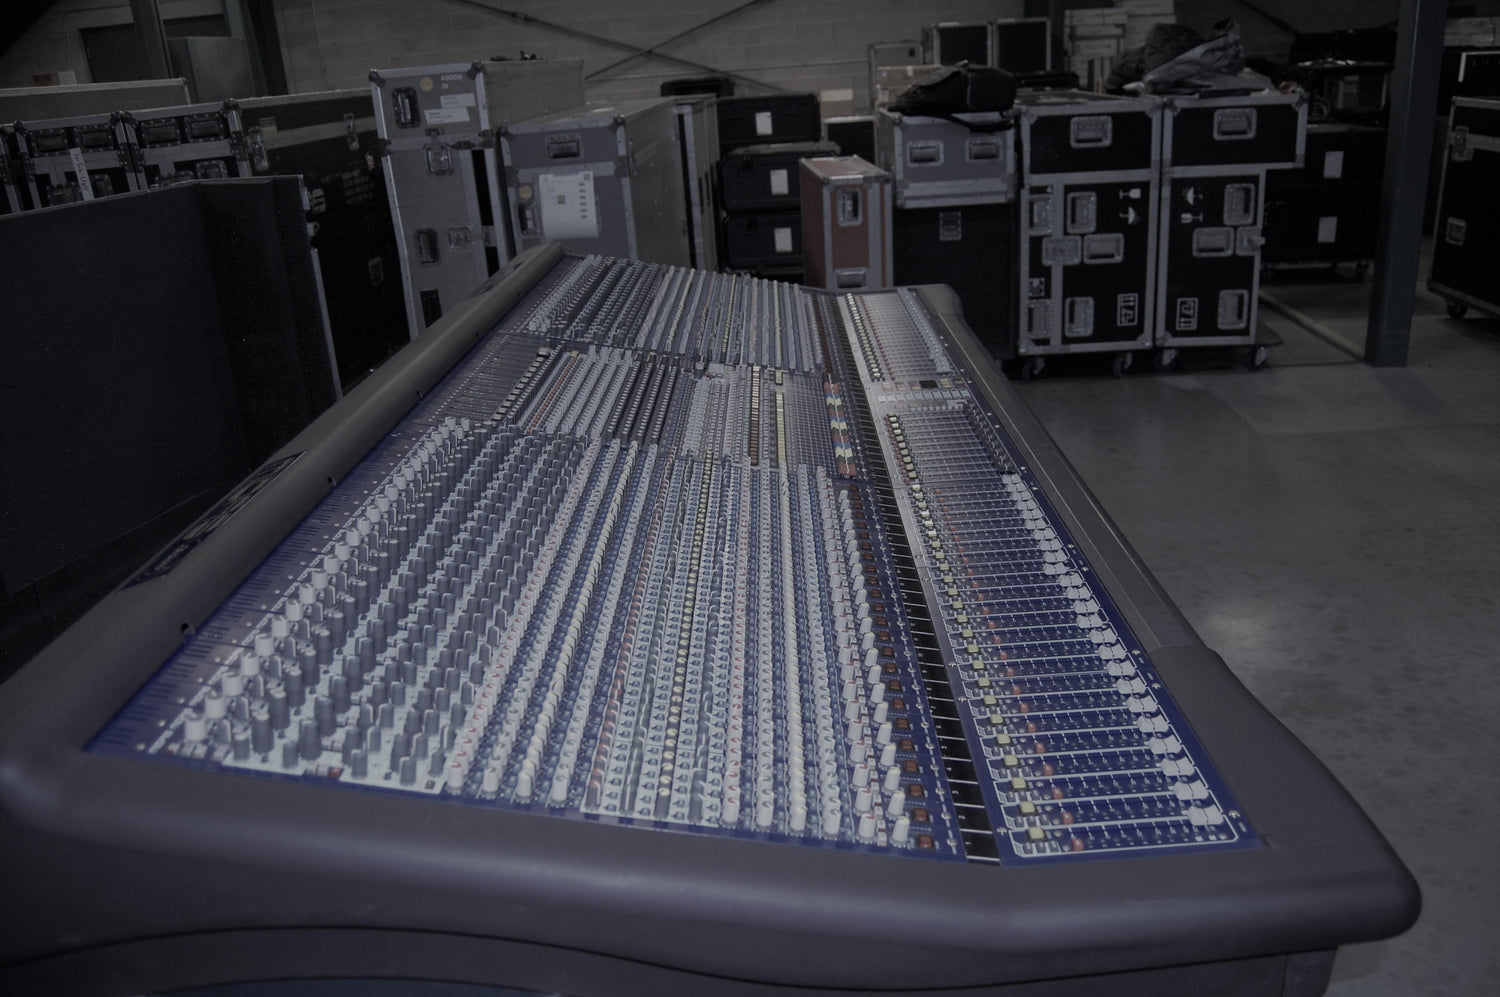 Used Audio Equipment For Sale